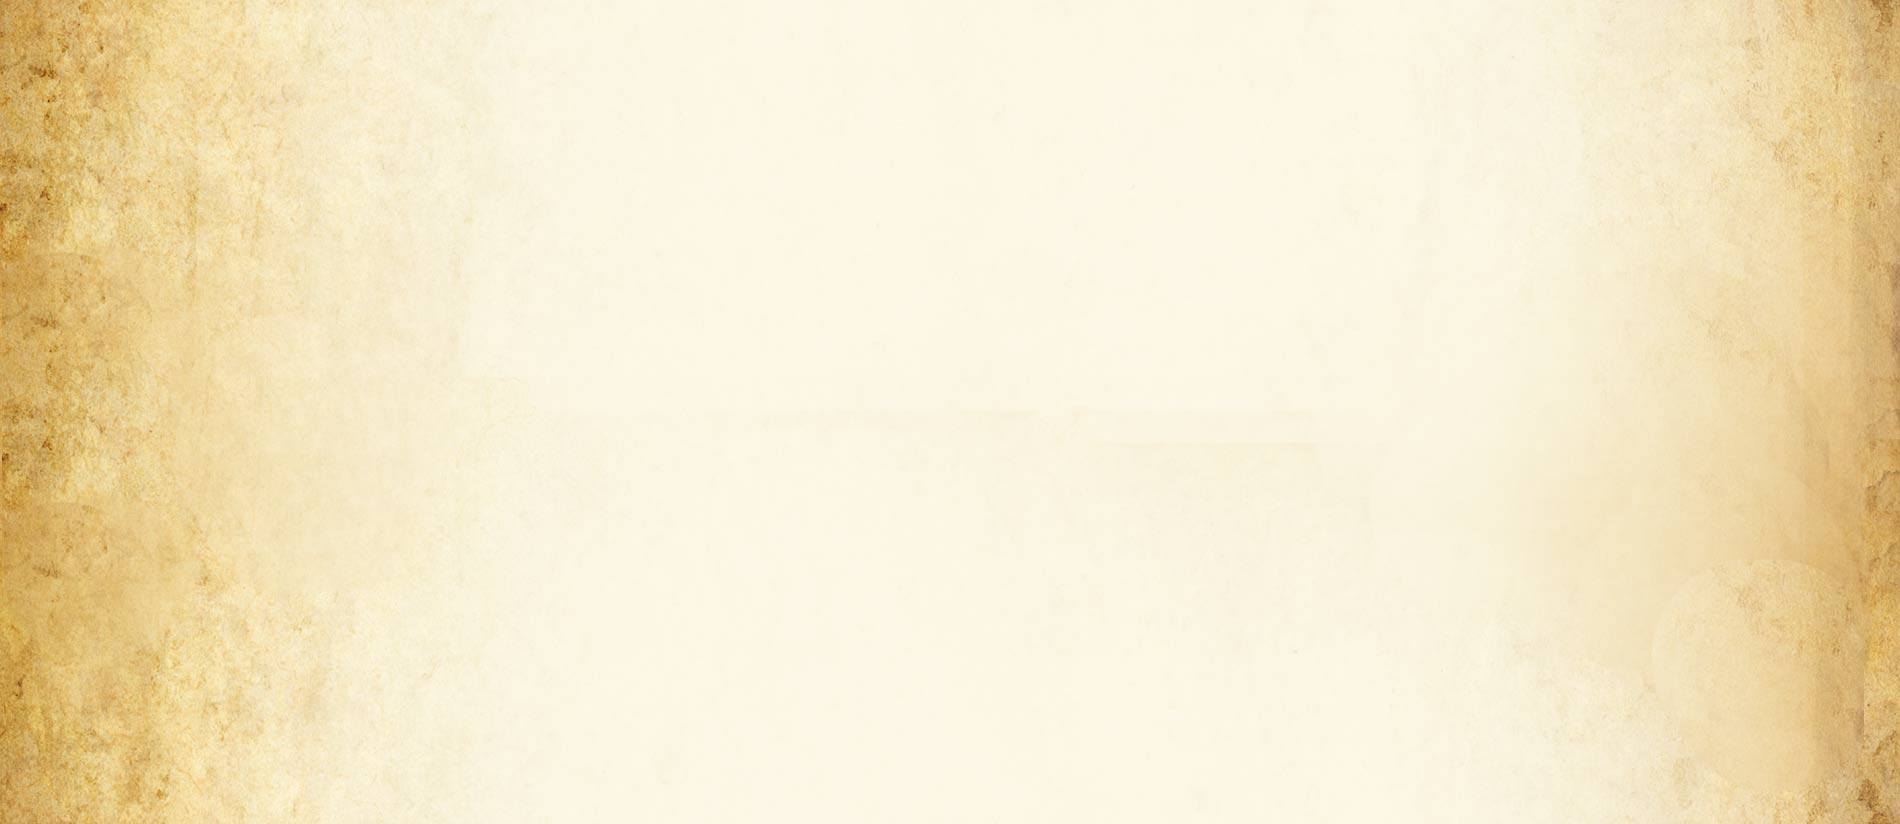 Parchment Background Wallpapers 